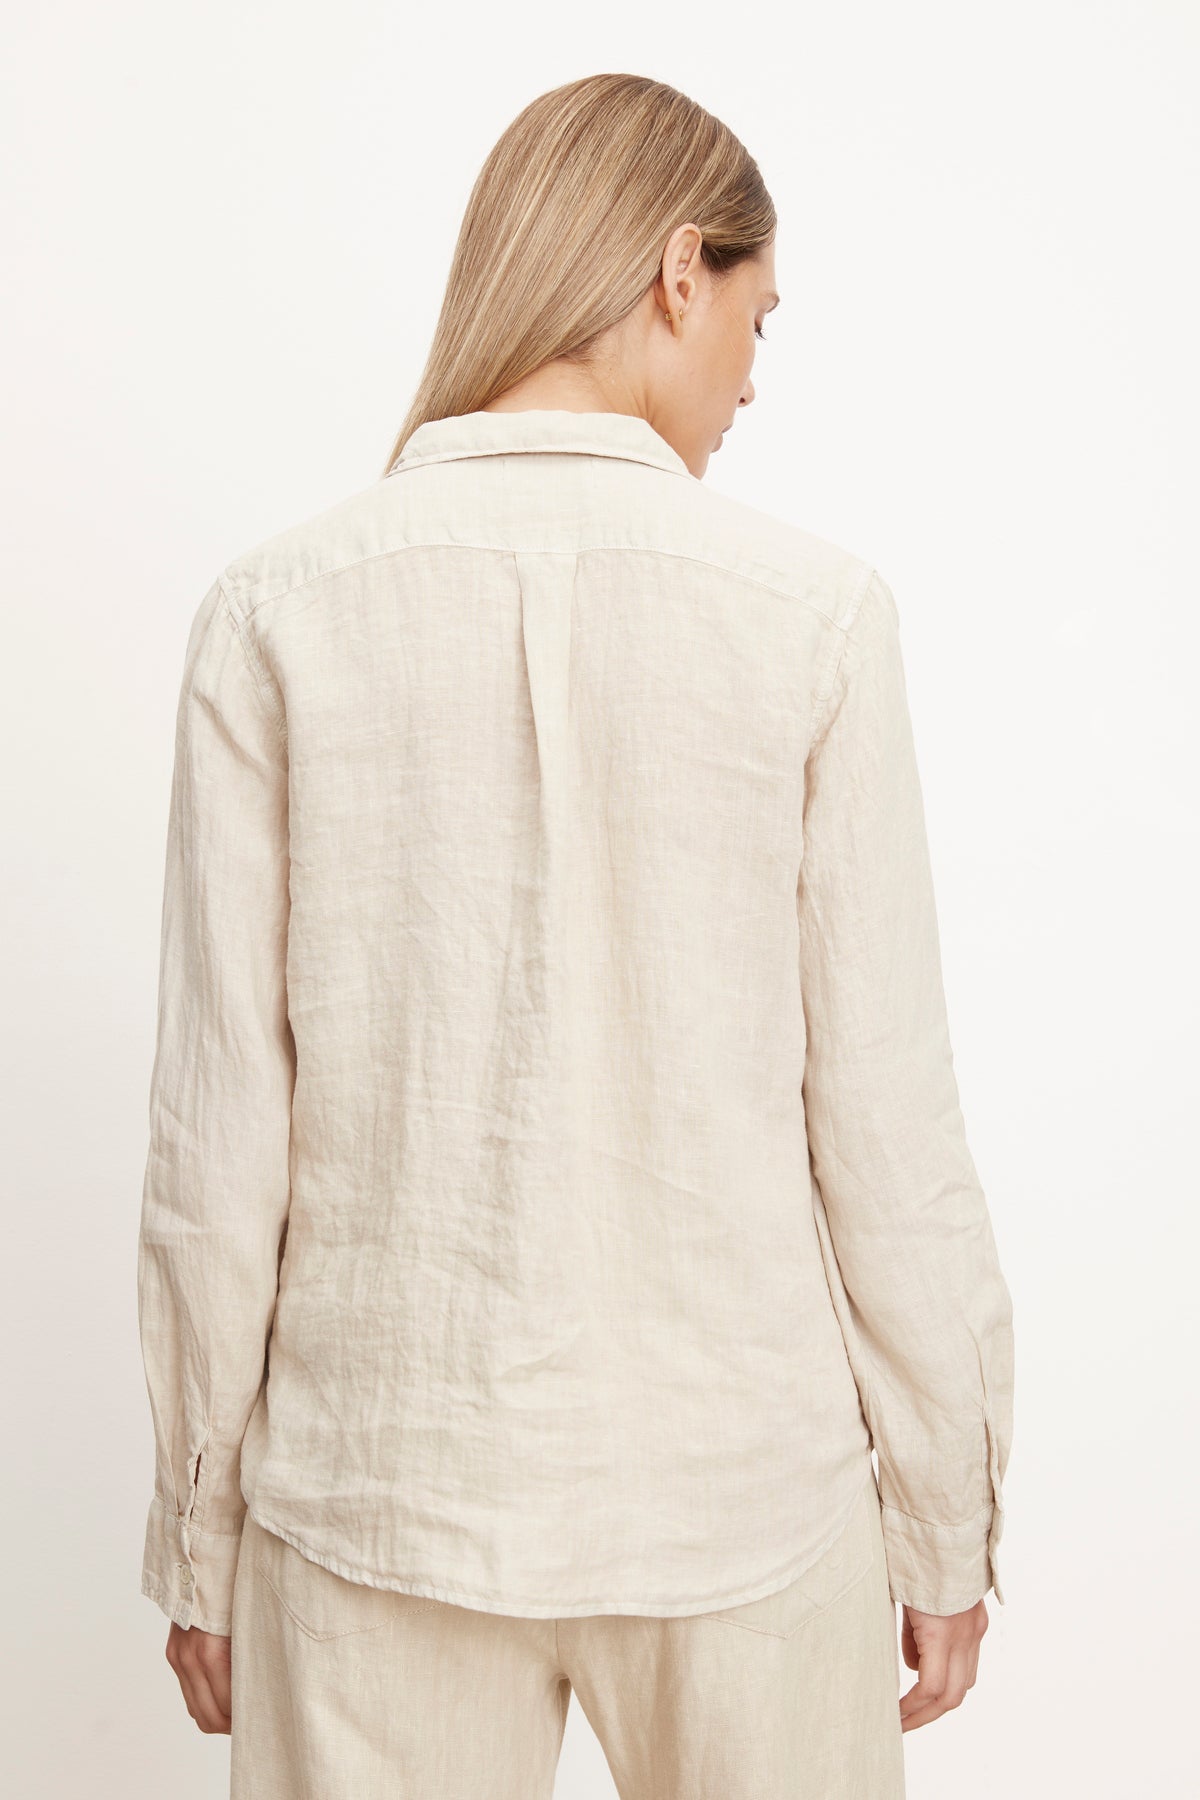 The back view of a woman wearing a Velvet by Graham & Spencer Natalia Linen Button-Up Shirt.-26423872487617